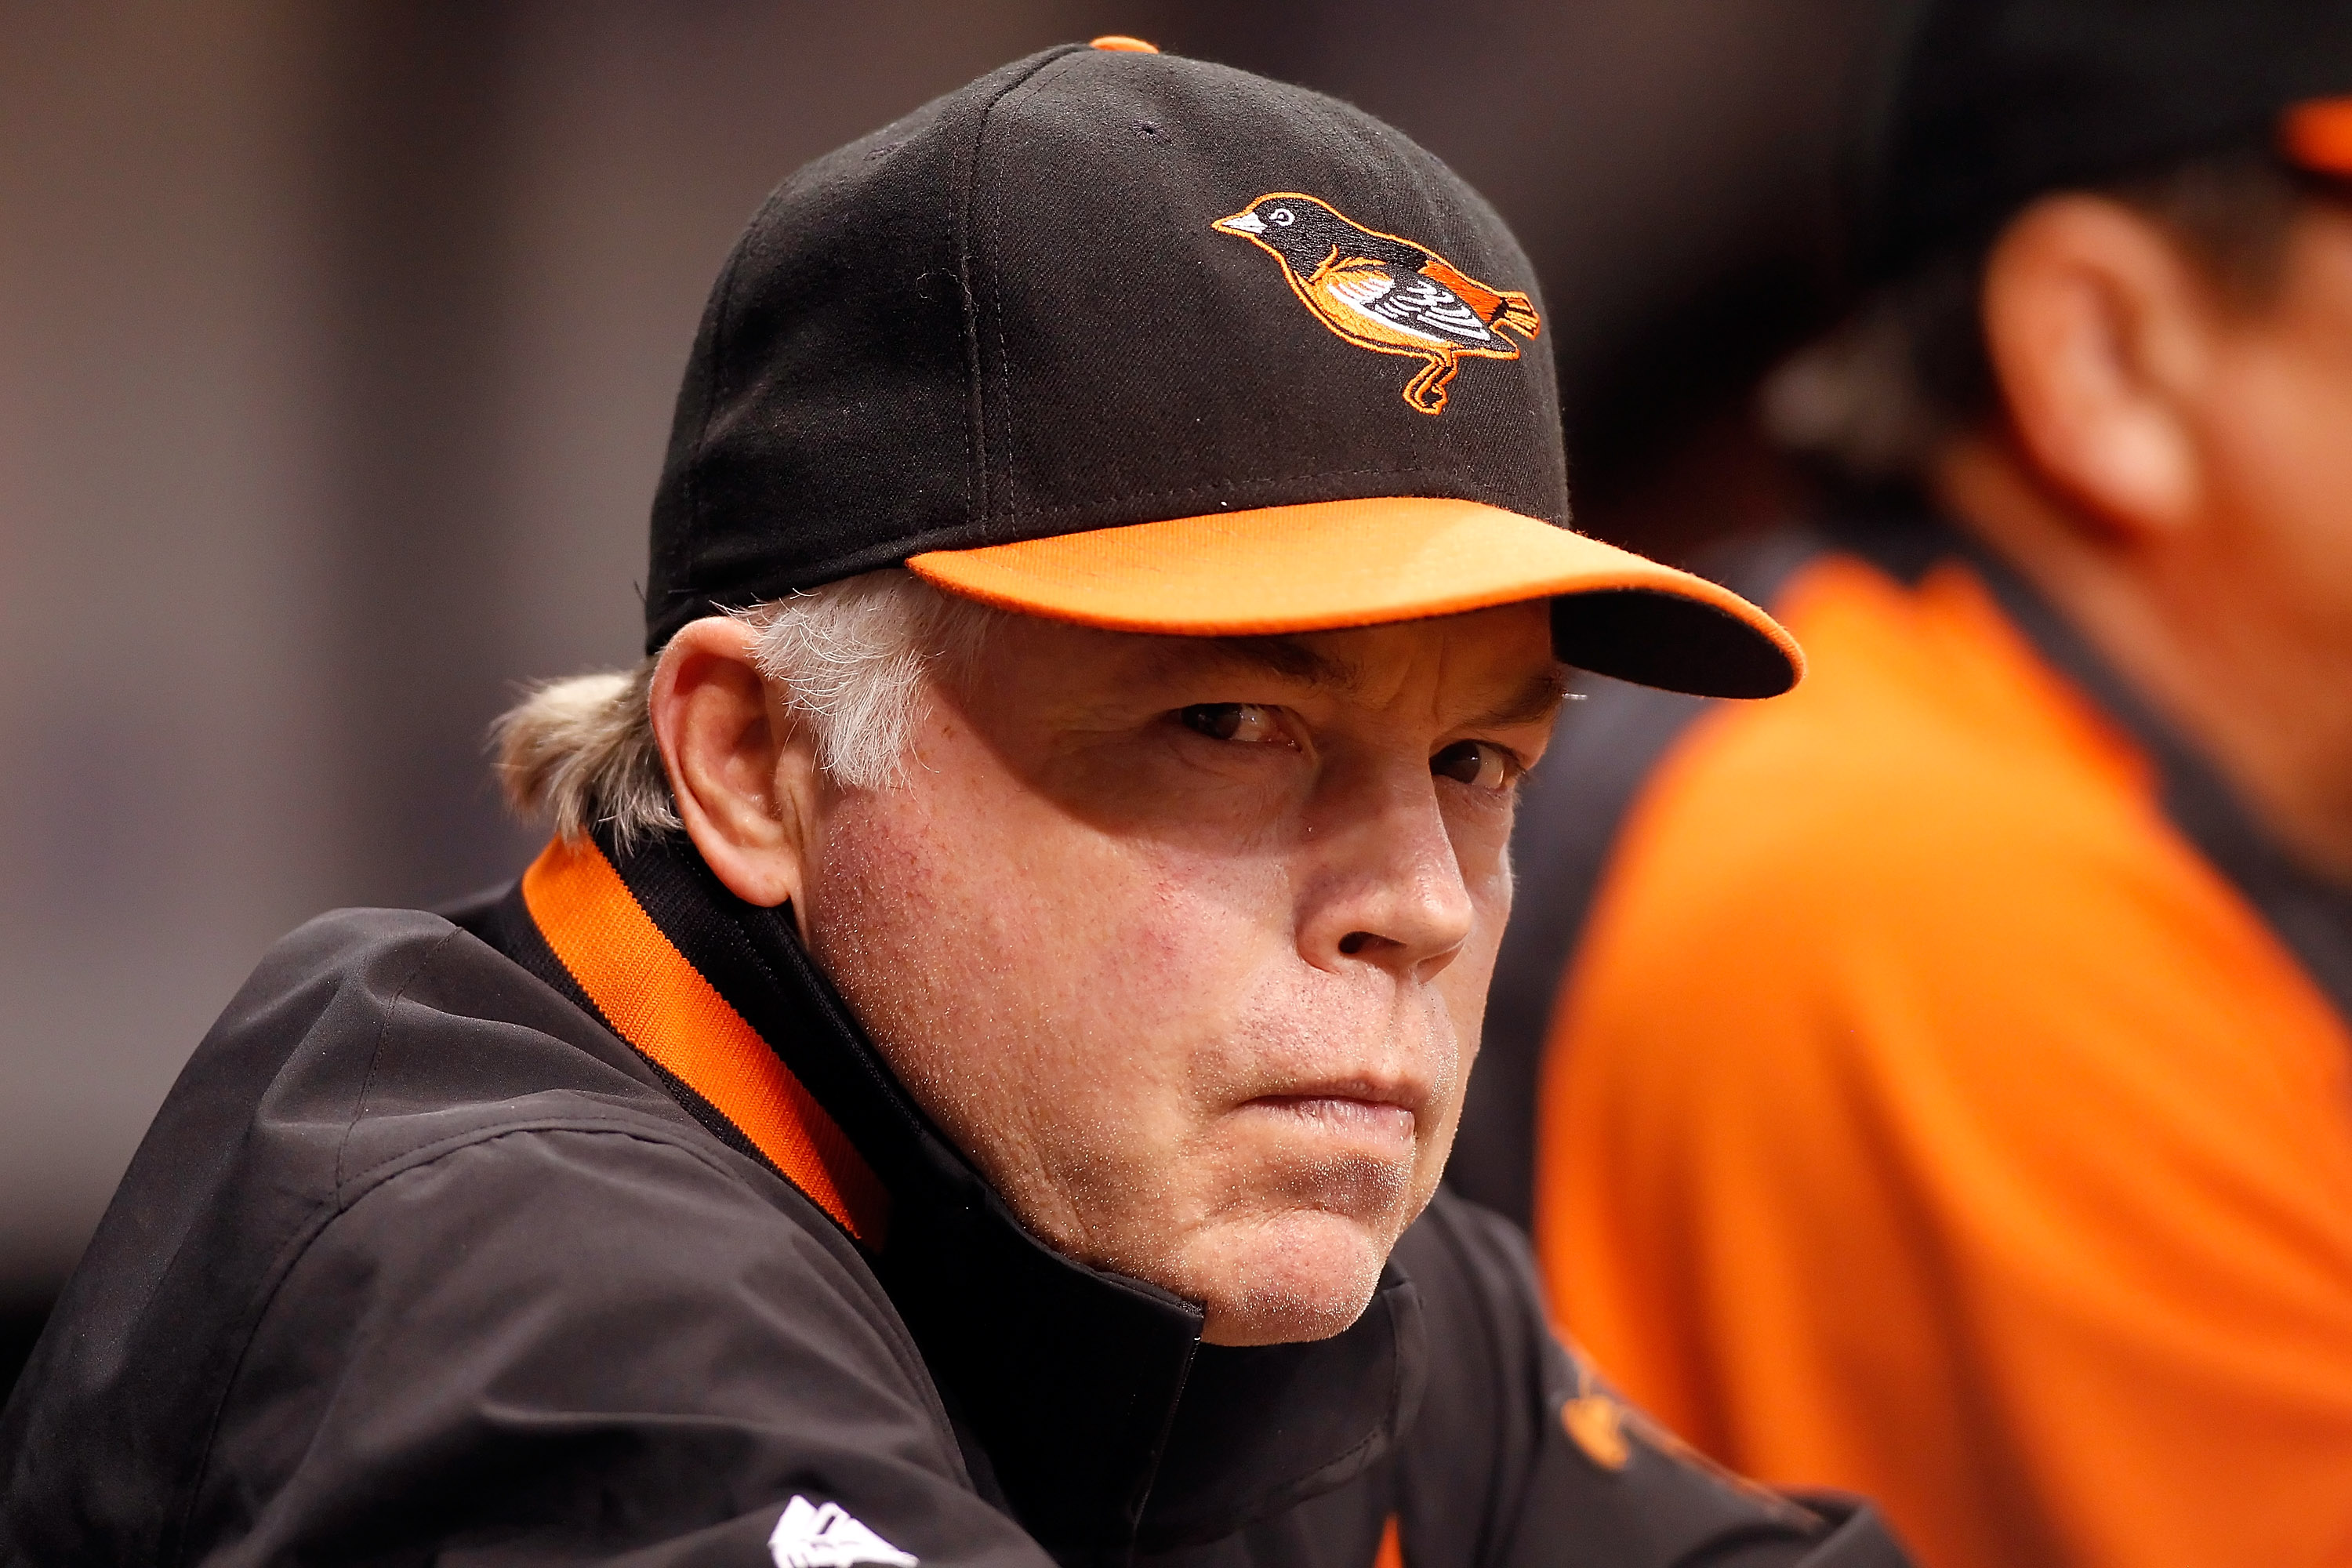 ST. PETERSBURG, FL - SEPTEMBER 29:  Manager Buck Showalter of the Baltimore Orioles watches his team against the Tampa Bay Rays during the game at Tropicana Field on September 29, 2010 in St. Petersburg, Florida.  (Photo by J. Meric/Getty Images)